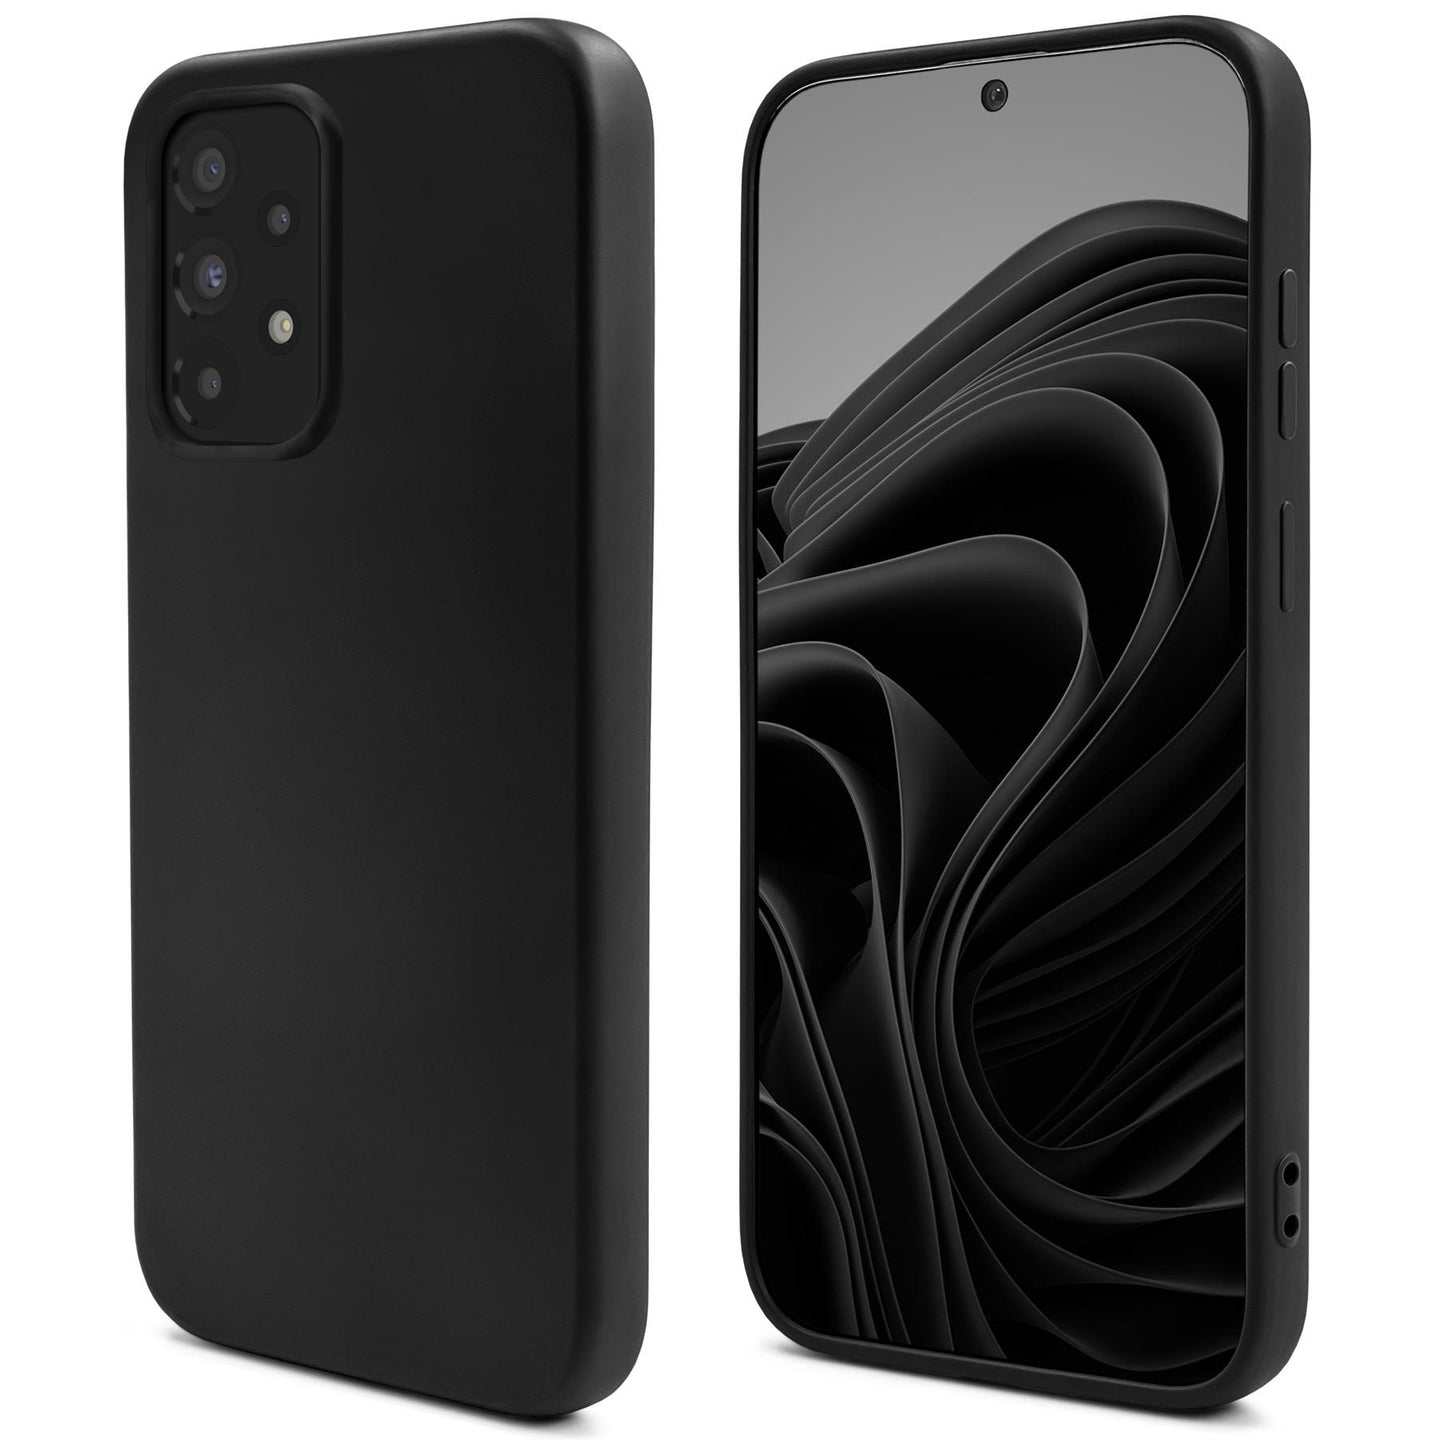 Moozy Lifestyle. Silicone Case for Samsung A53 5G, Black - Liquid Silicone Lightweight Cover with Matte Finish and Soft Microfiber Lining, Premium Silicone Case